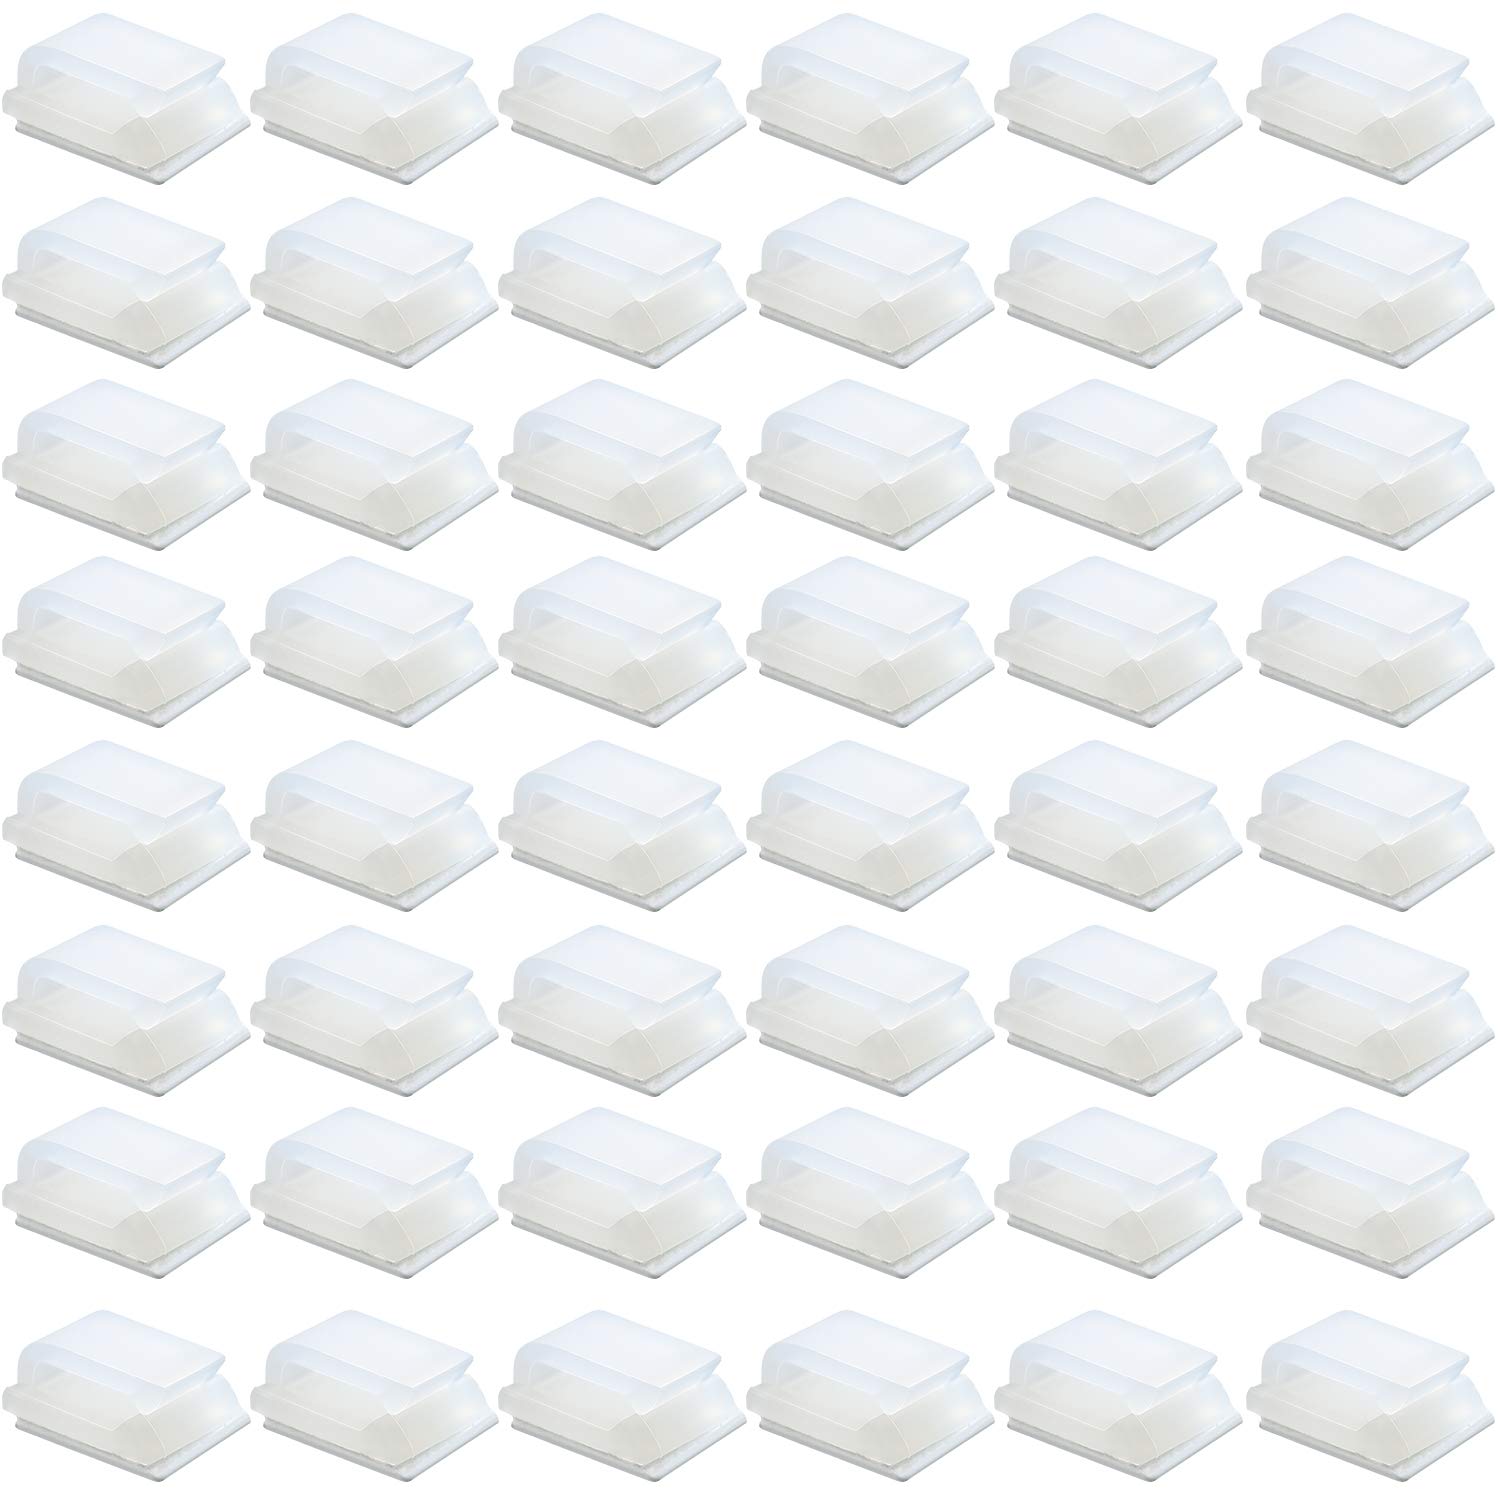 50 Pack Self-Adhesive Cable Clips Electrical Wire Clips Cable Management Clips for Car, Office and Home (13 x 10 mm, White)